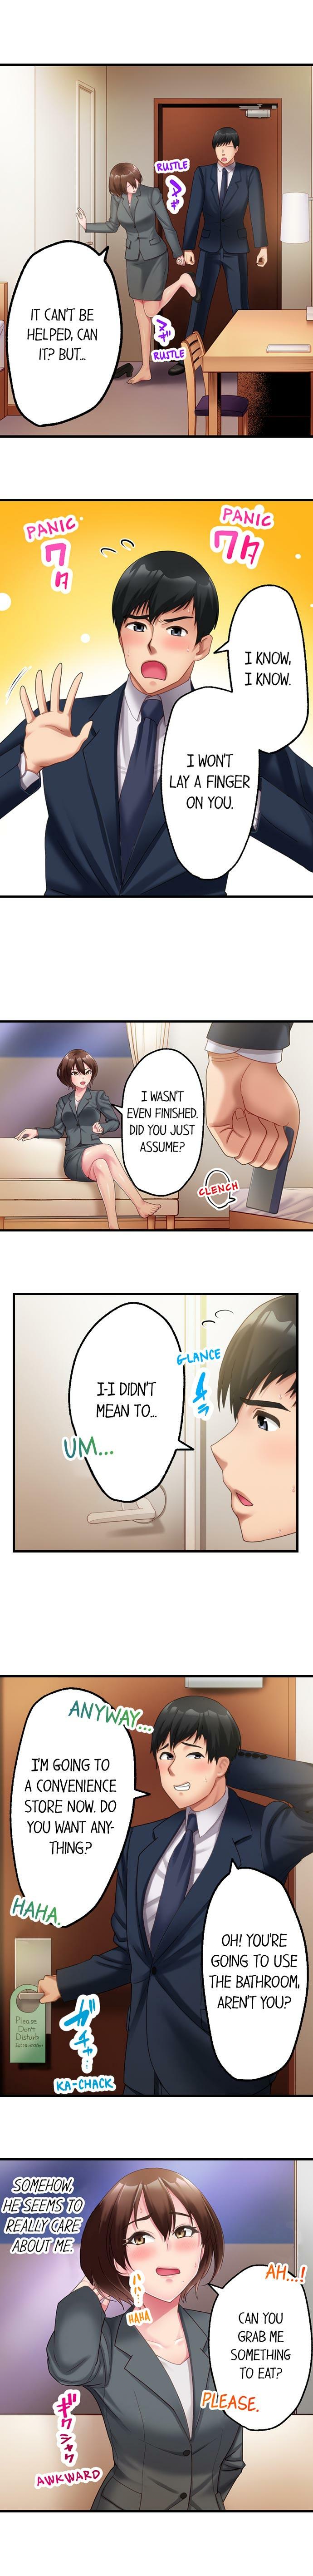 [Kayanoi Ino] Busted by my Co-Worker 18/18 [English] Completed